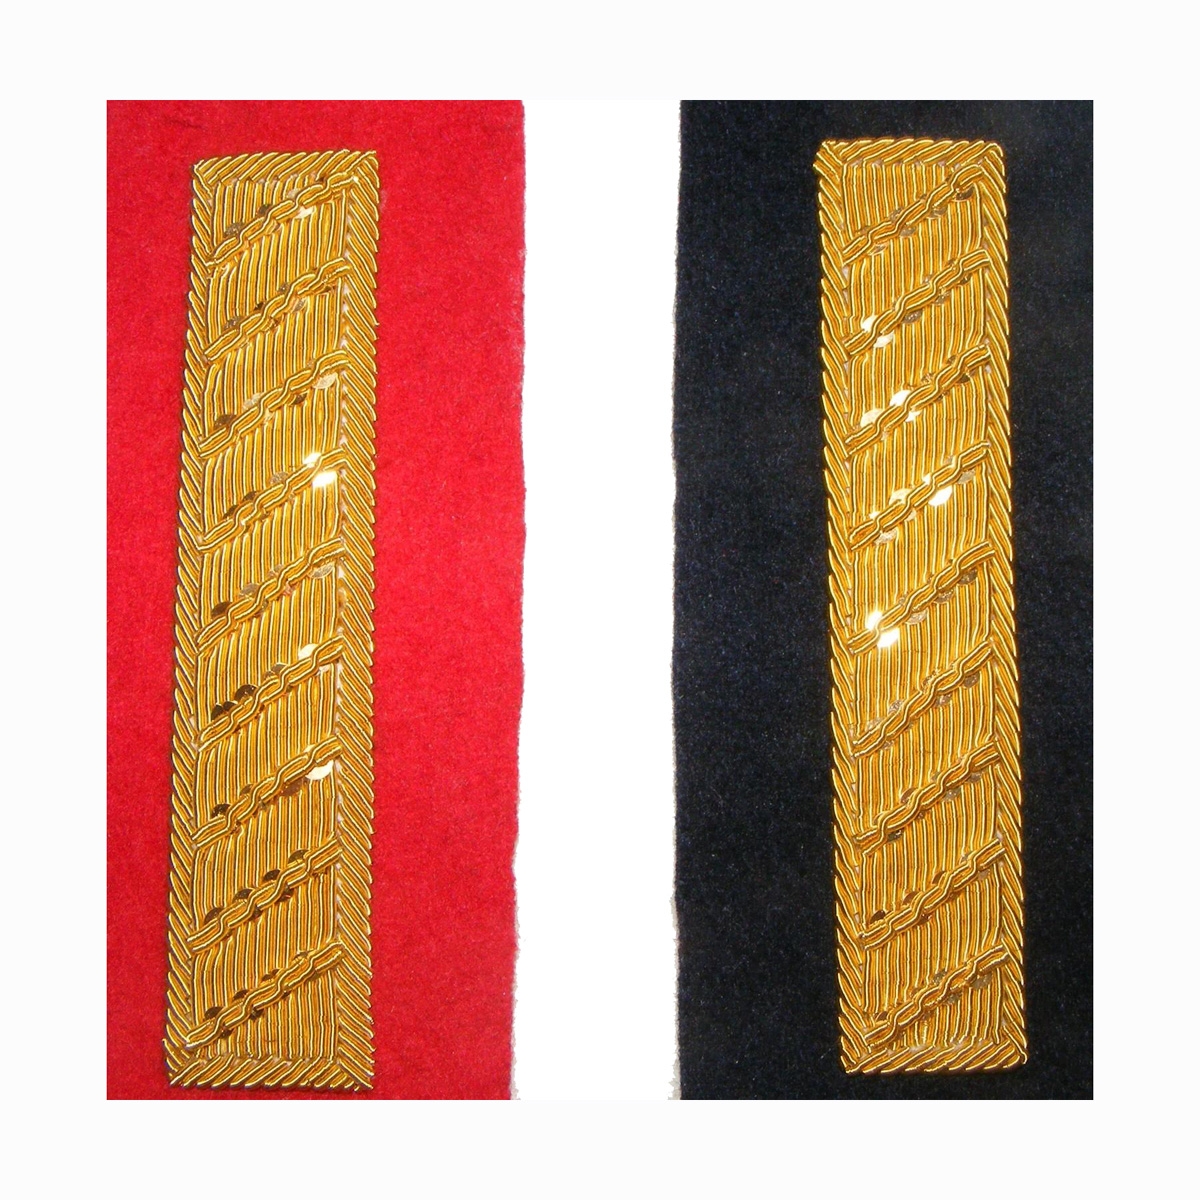 Shoulder straps - hand embroidery bullion wire goldwork red and black color Bullion Wire Cord Should